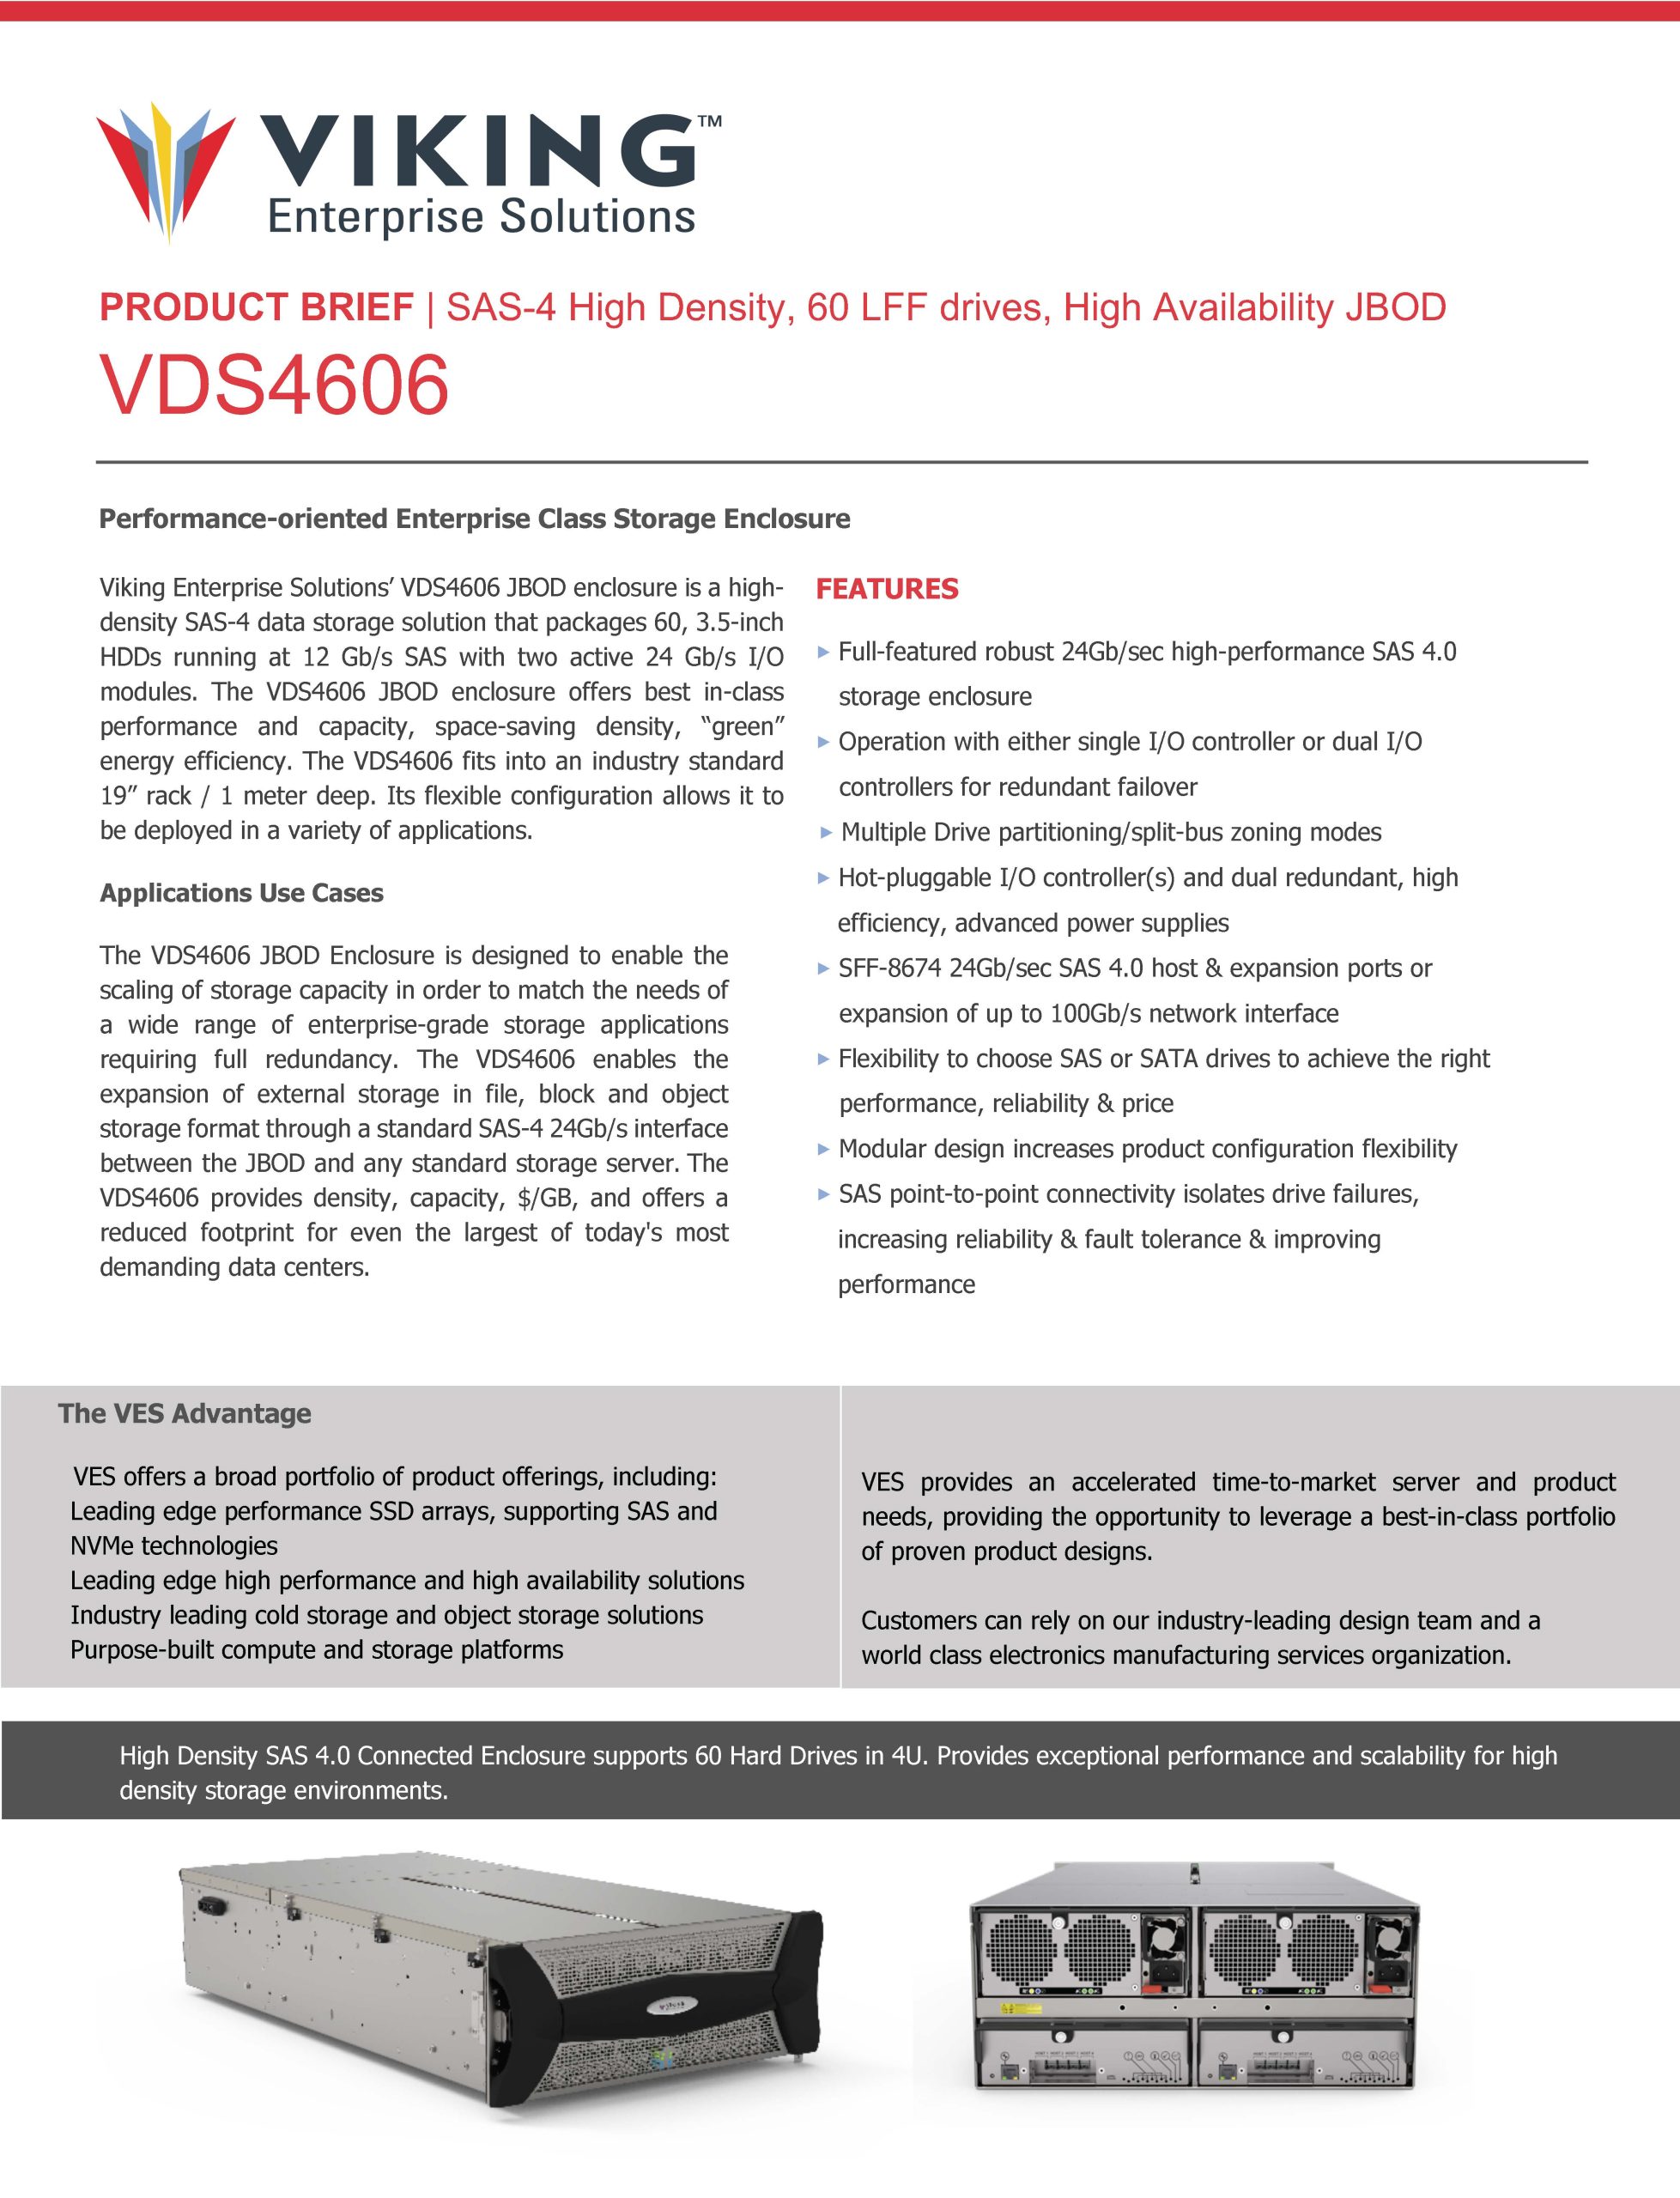 NDS4603 Product Brief